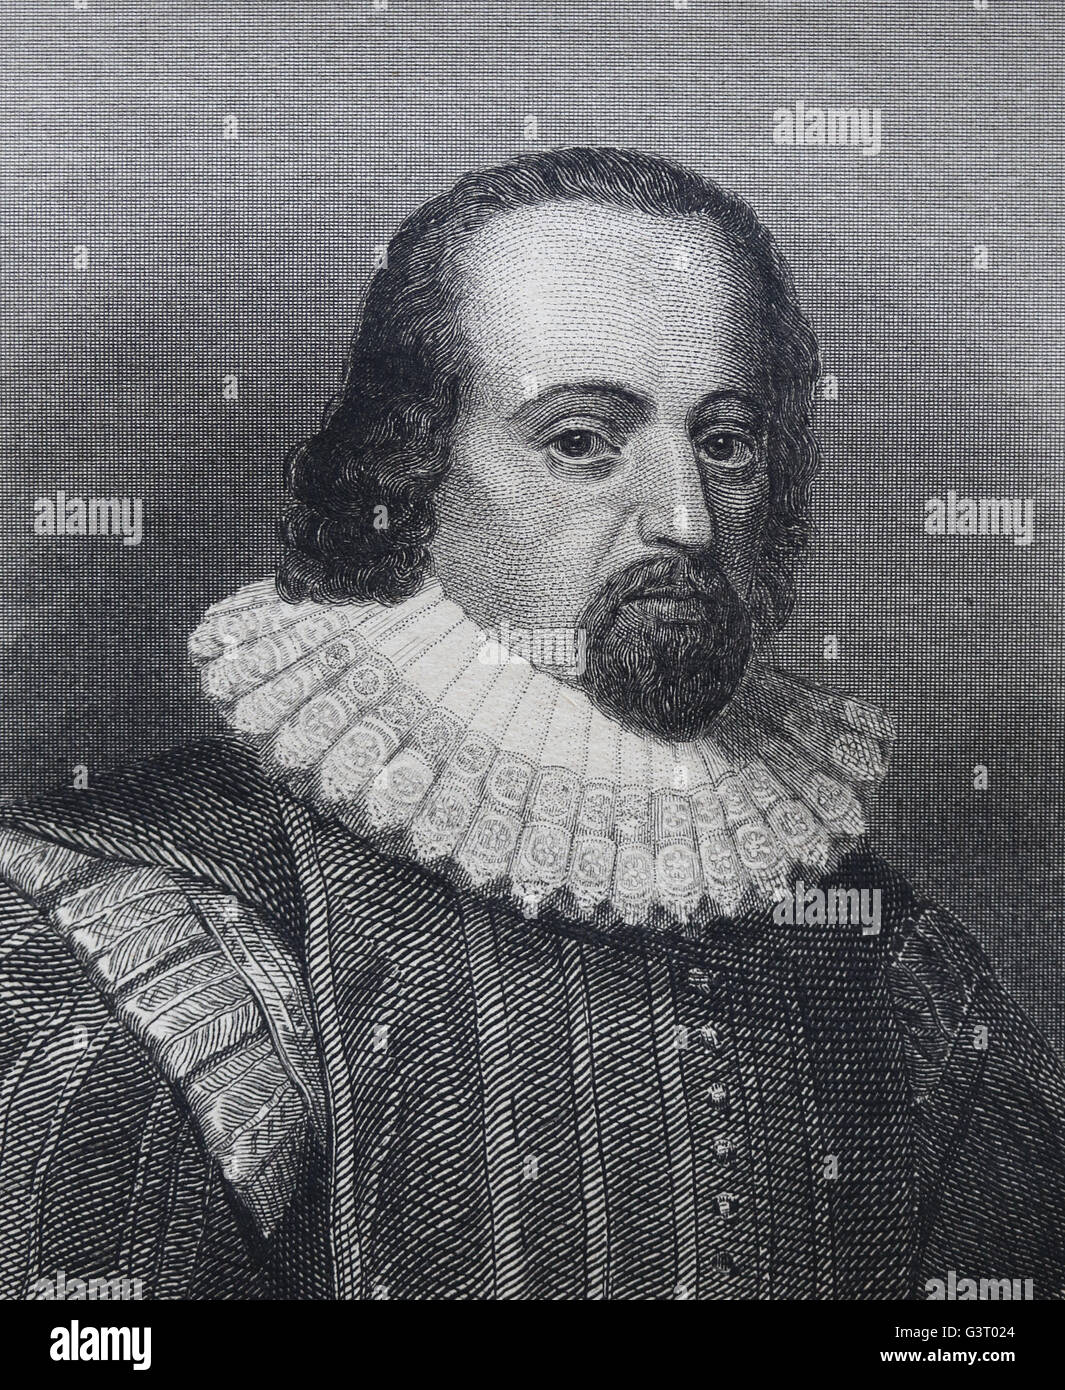 Francis Bacon, 1st Viscount St Alban (1561-1626). English philosopher, statesman and scientific. Engraving, 19th century. Stock Photo